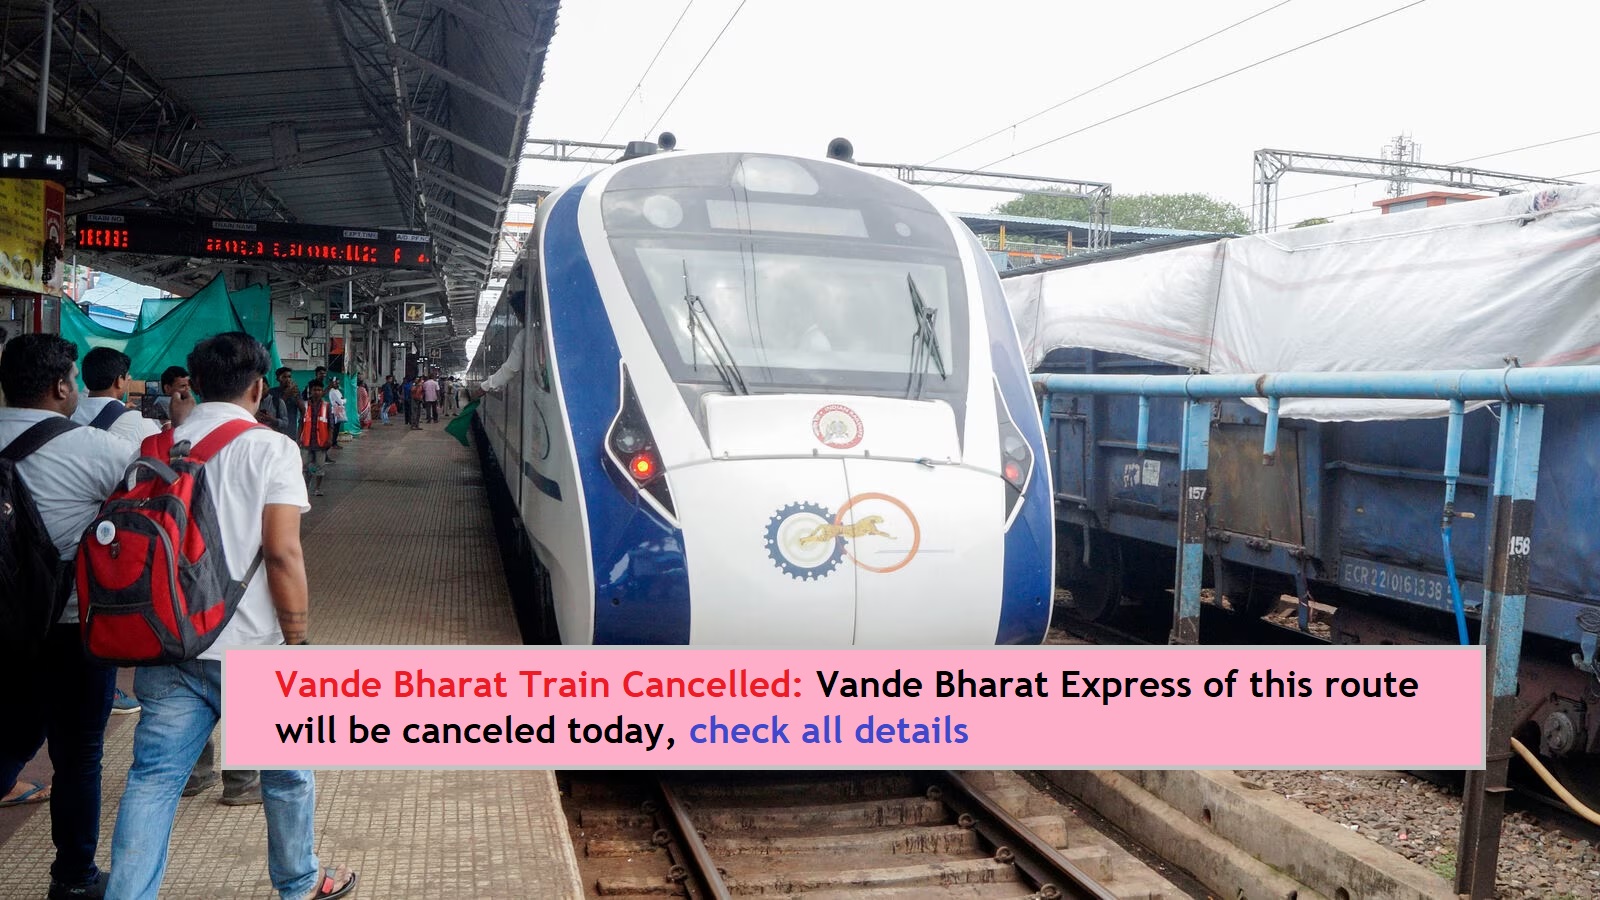 Vande Bharat Train Cancelled: Vande Bharat Express of this route will be canceled today, check all details